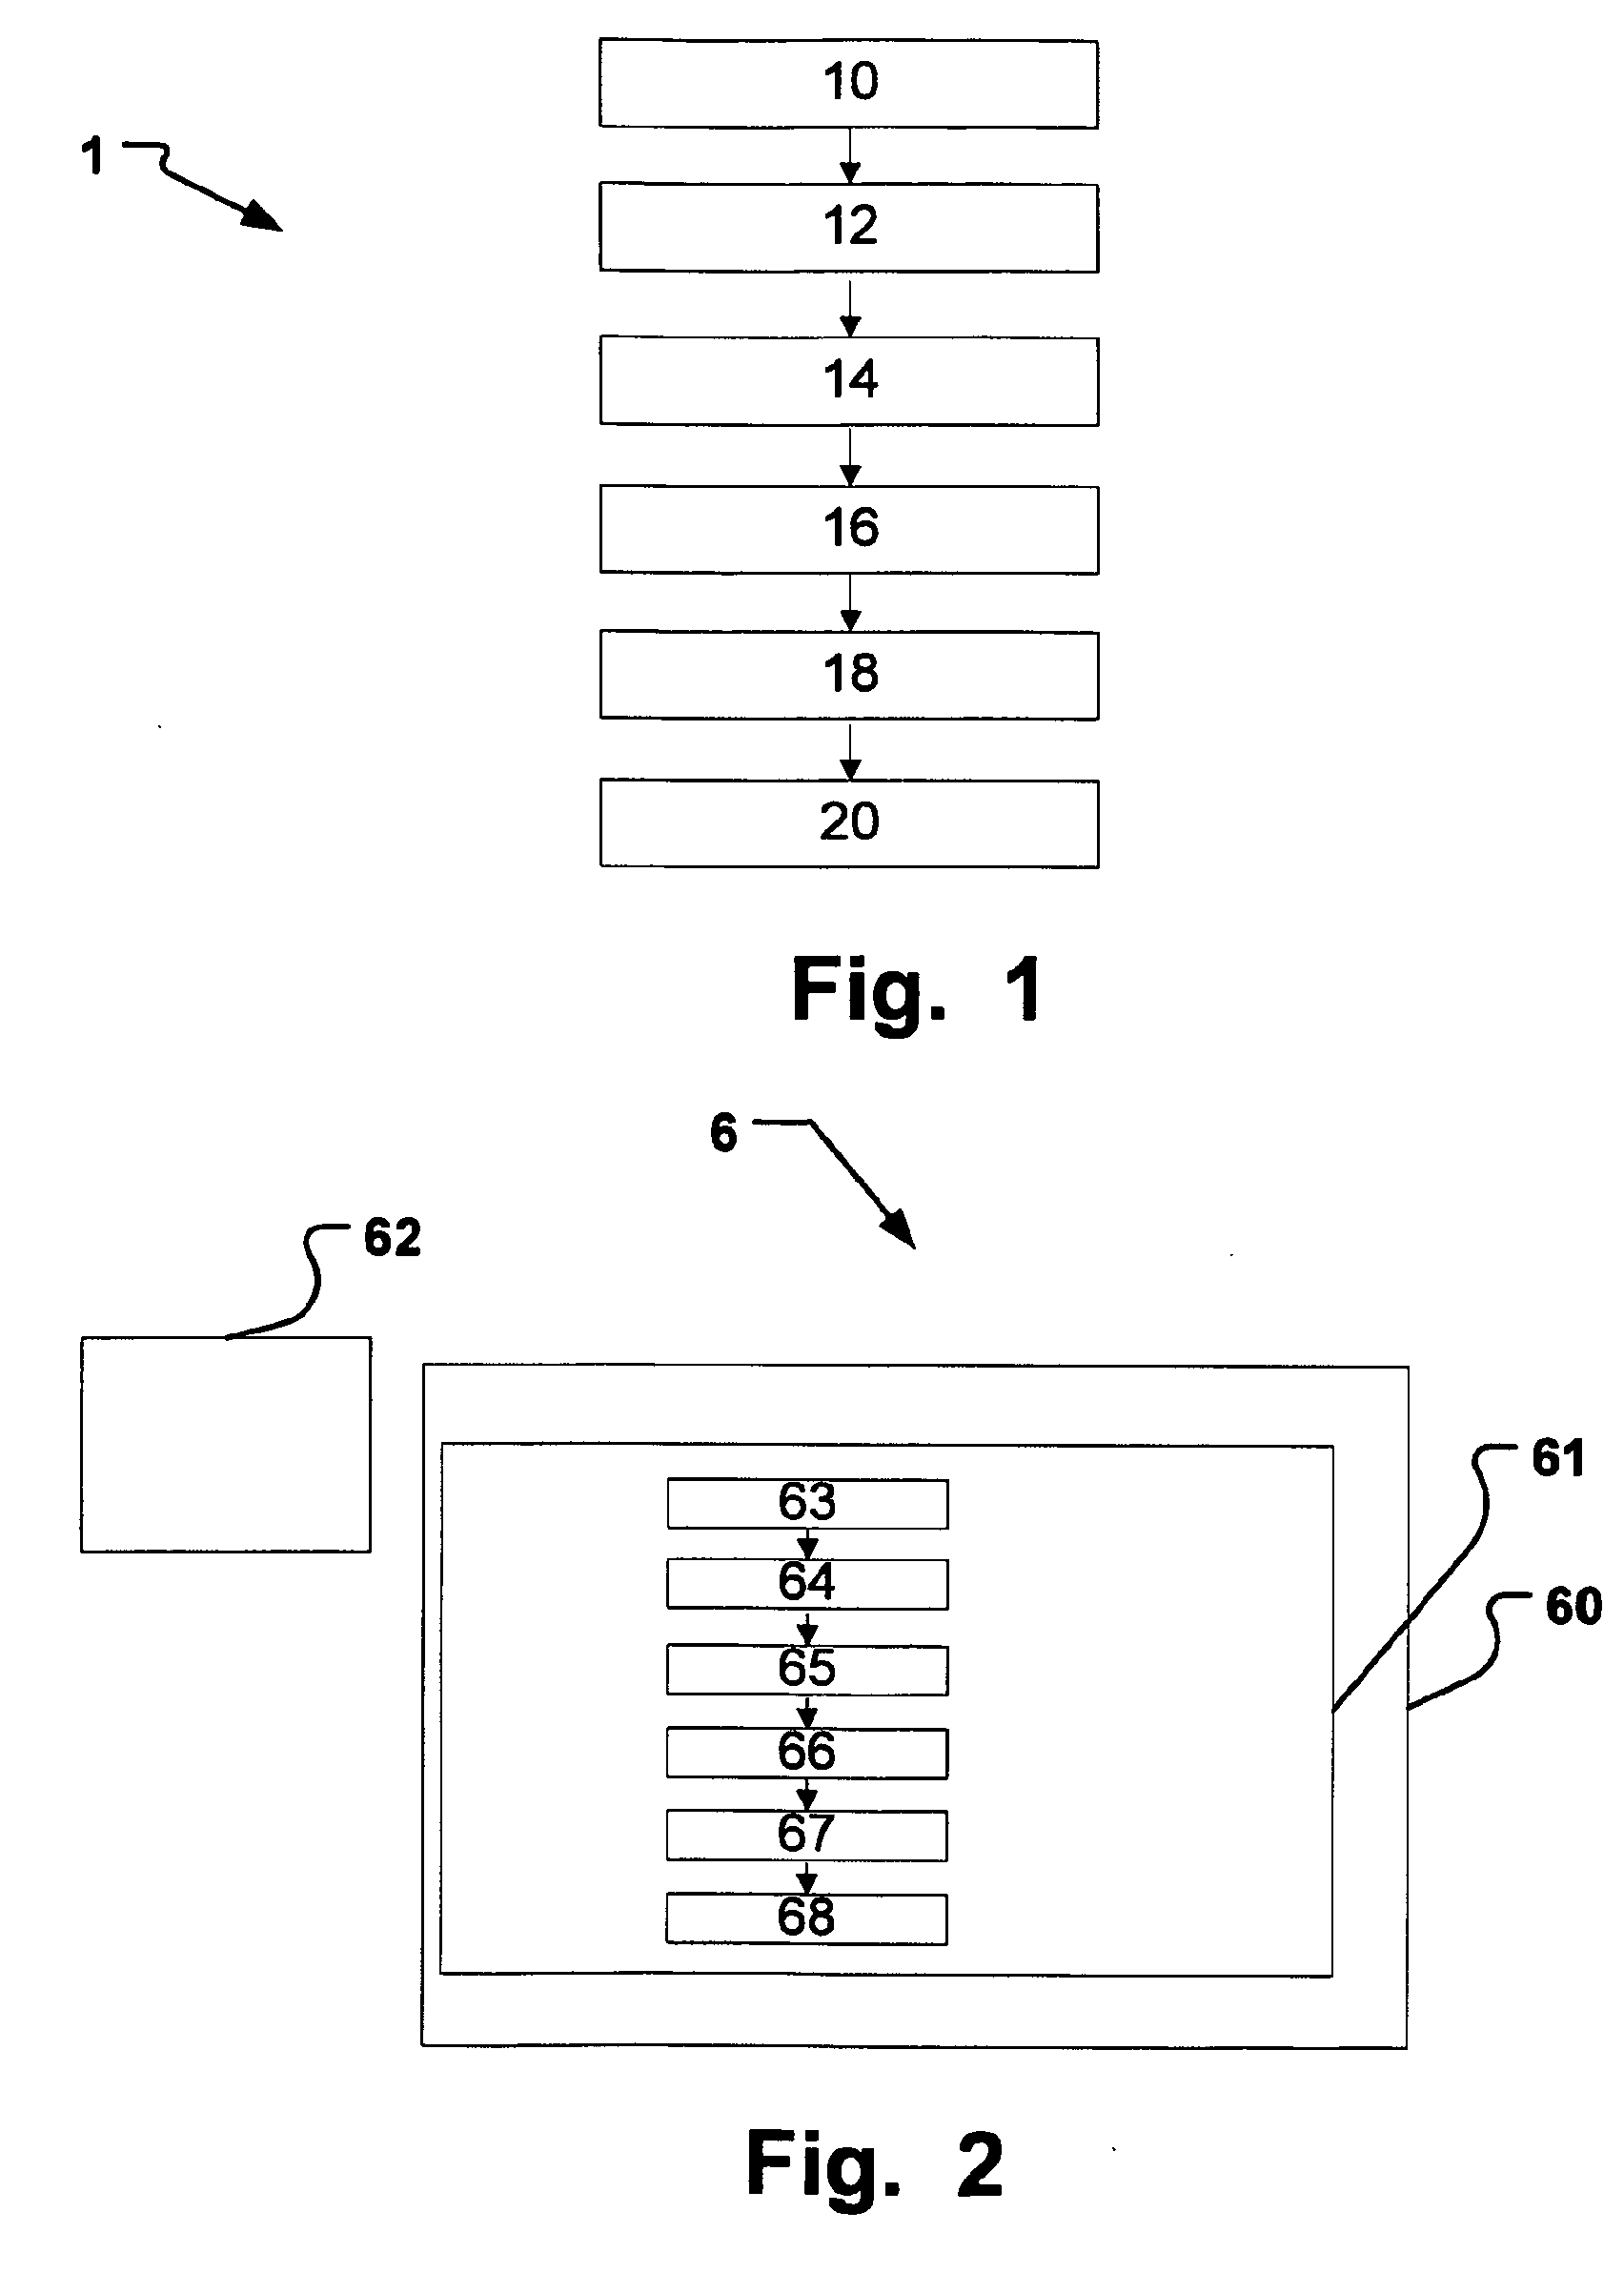 System and method for planning and/or producing a dental prosthesis